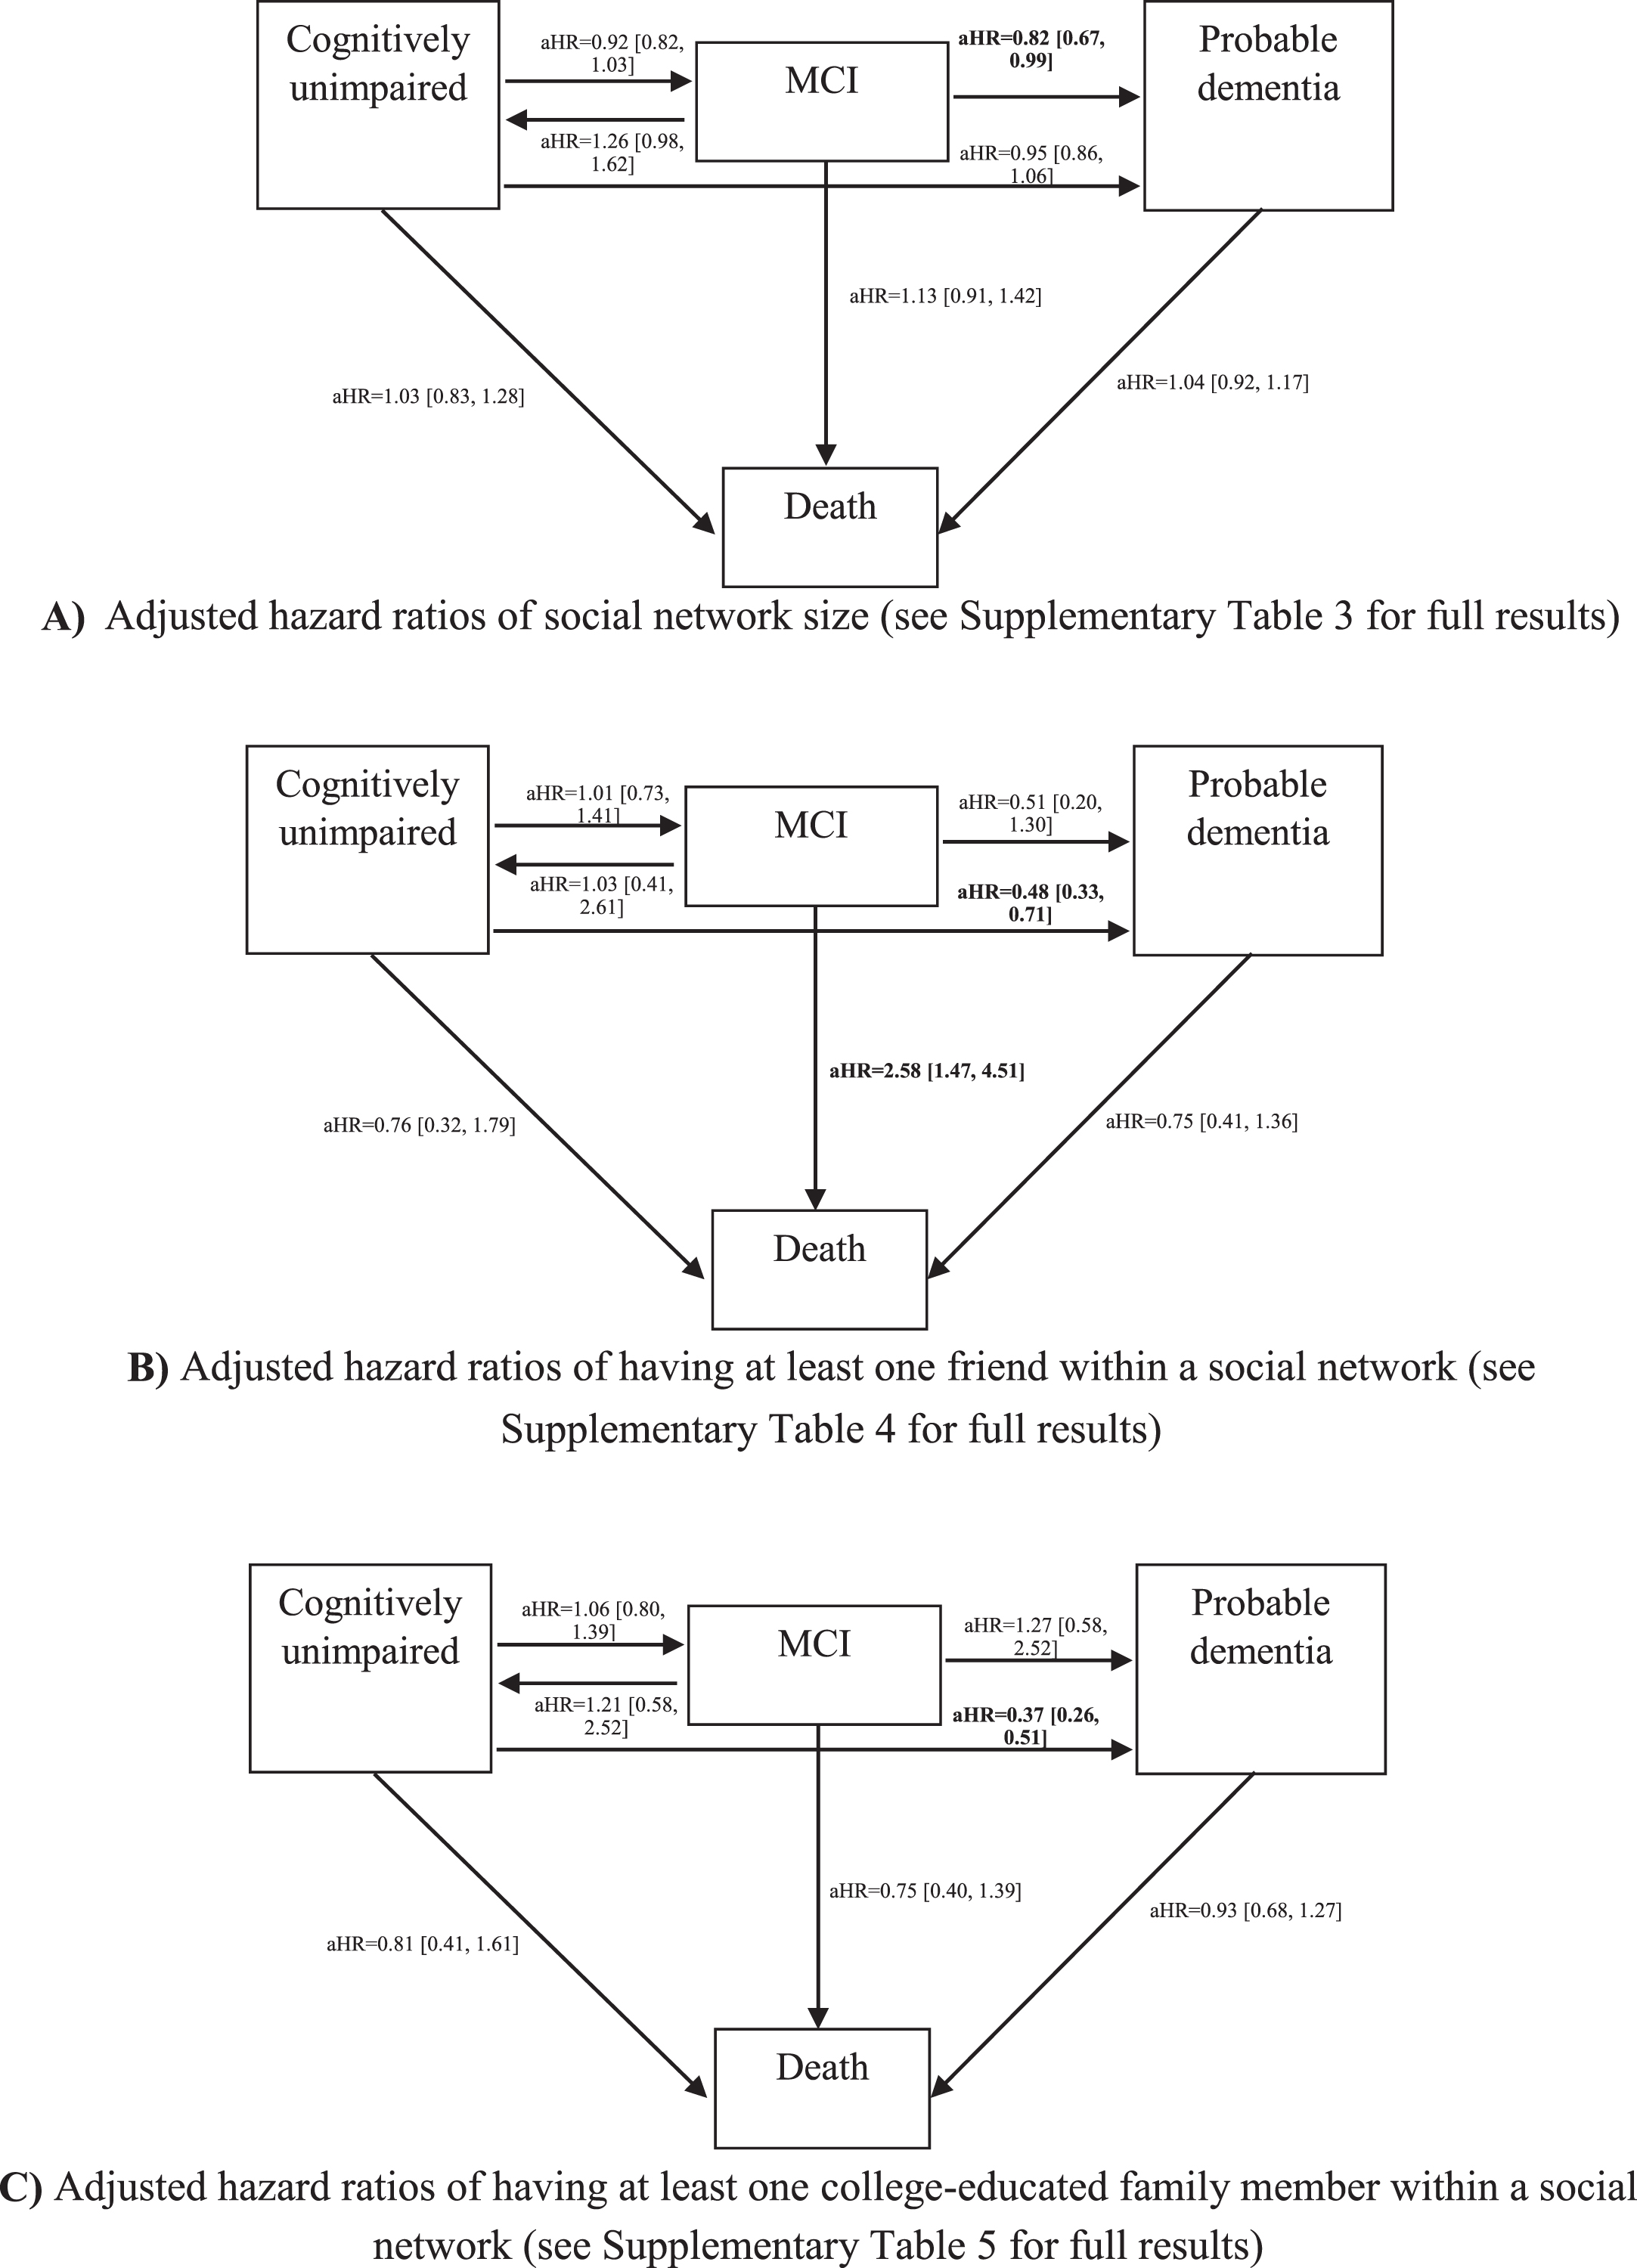 Four-state survival models for adjusted Hazard Ratios of social network structure on cognitive transitions. Adjusted hazard ratios of social network size (see Supplementary Table 3 for full results). B) Adjusted hazard ratios of having at least one friend within a social network (see Supplementary Table 4 for full results). C) Adjusted hazard ratios of having at least one college-educated family member within a social network (see Supplementary Table 5 for full results). Numbers expressed as pooled adjusted Hazard Ratios with [95%Confidence Interval]. Full results emerging from multivariable adjusted models are presented in Supplementary Tables 3-5.